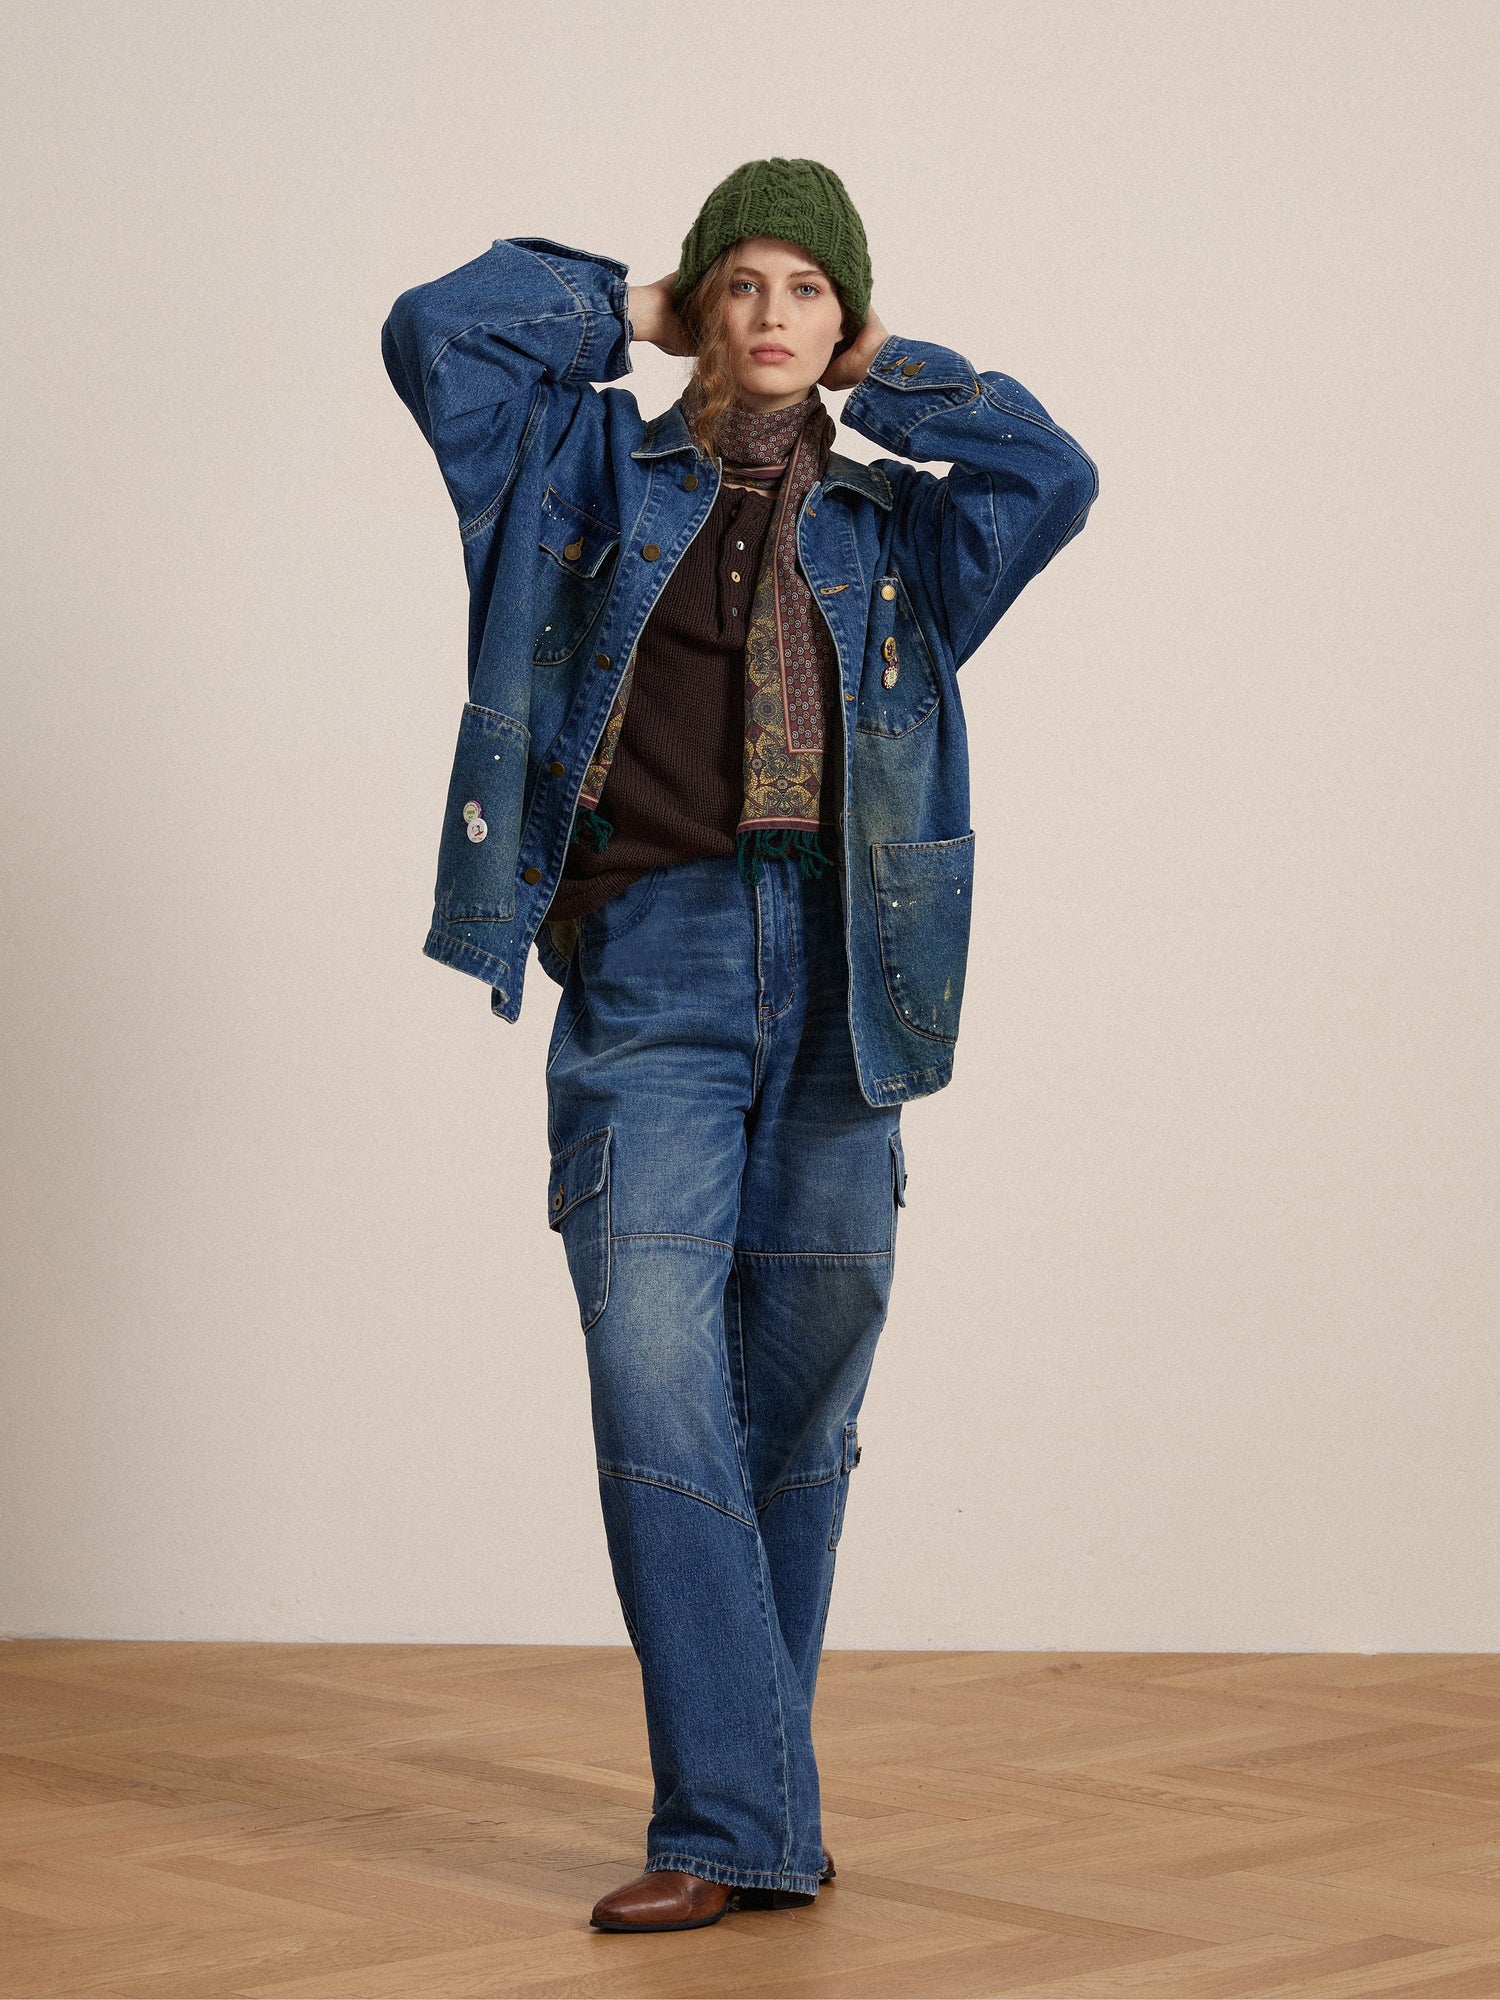 A woman in a stylish denim outfit, featuring a jacket, Siwa Cargo Paneled Jeans, and a green beanie, stands against a neutral background.